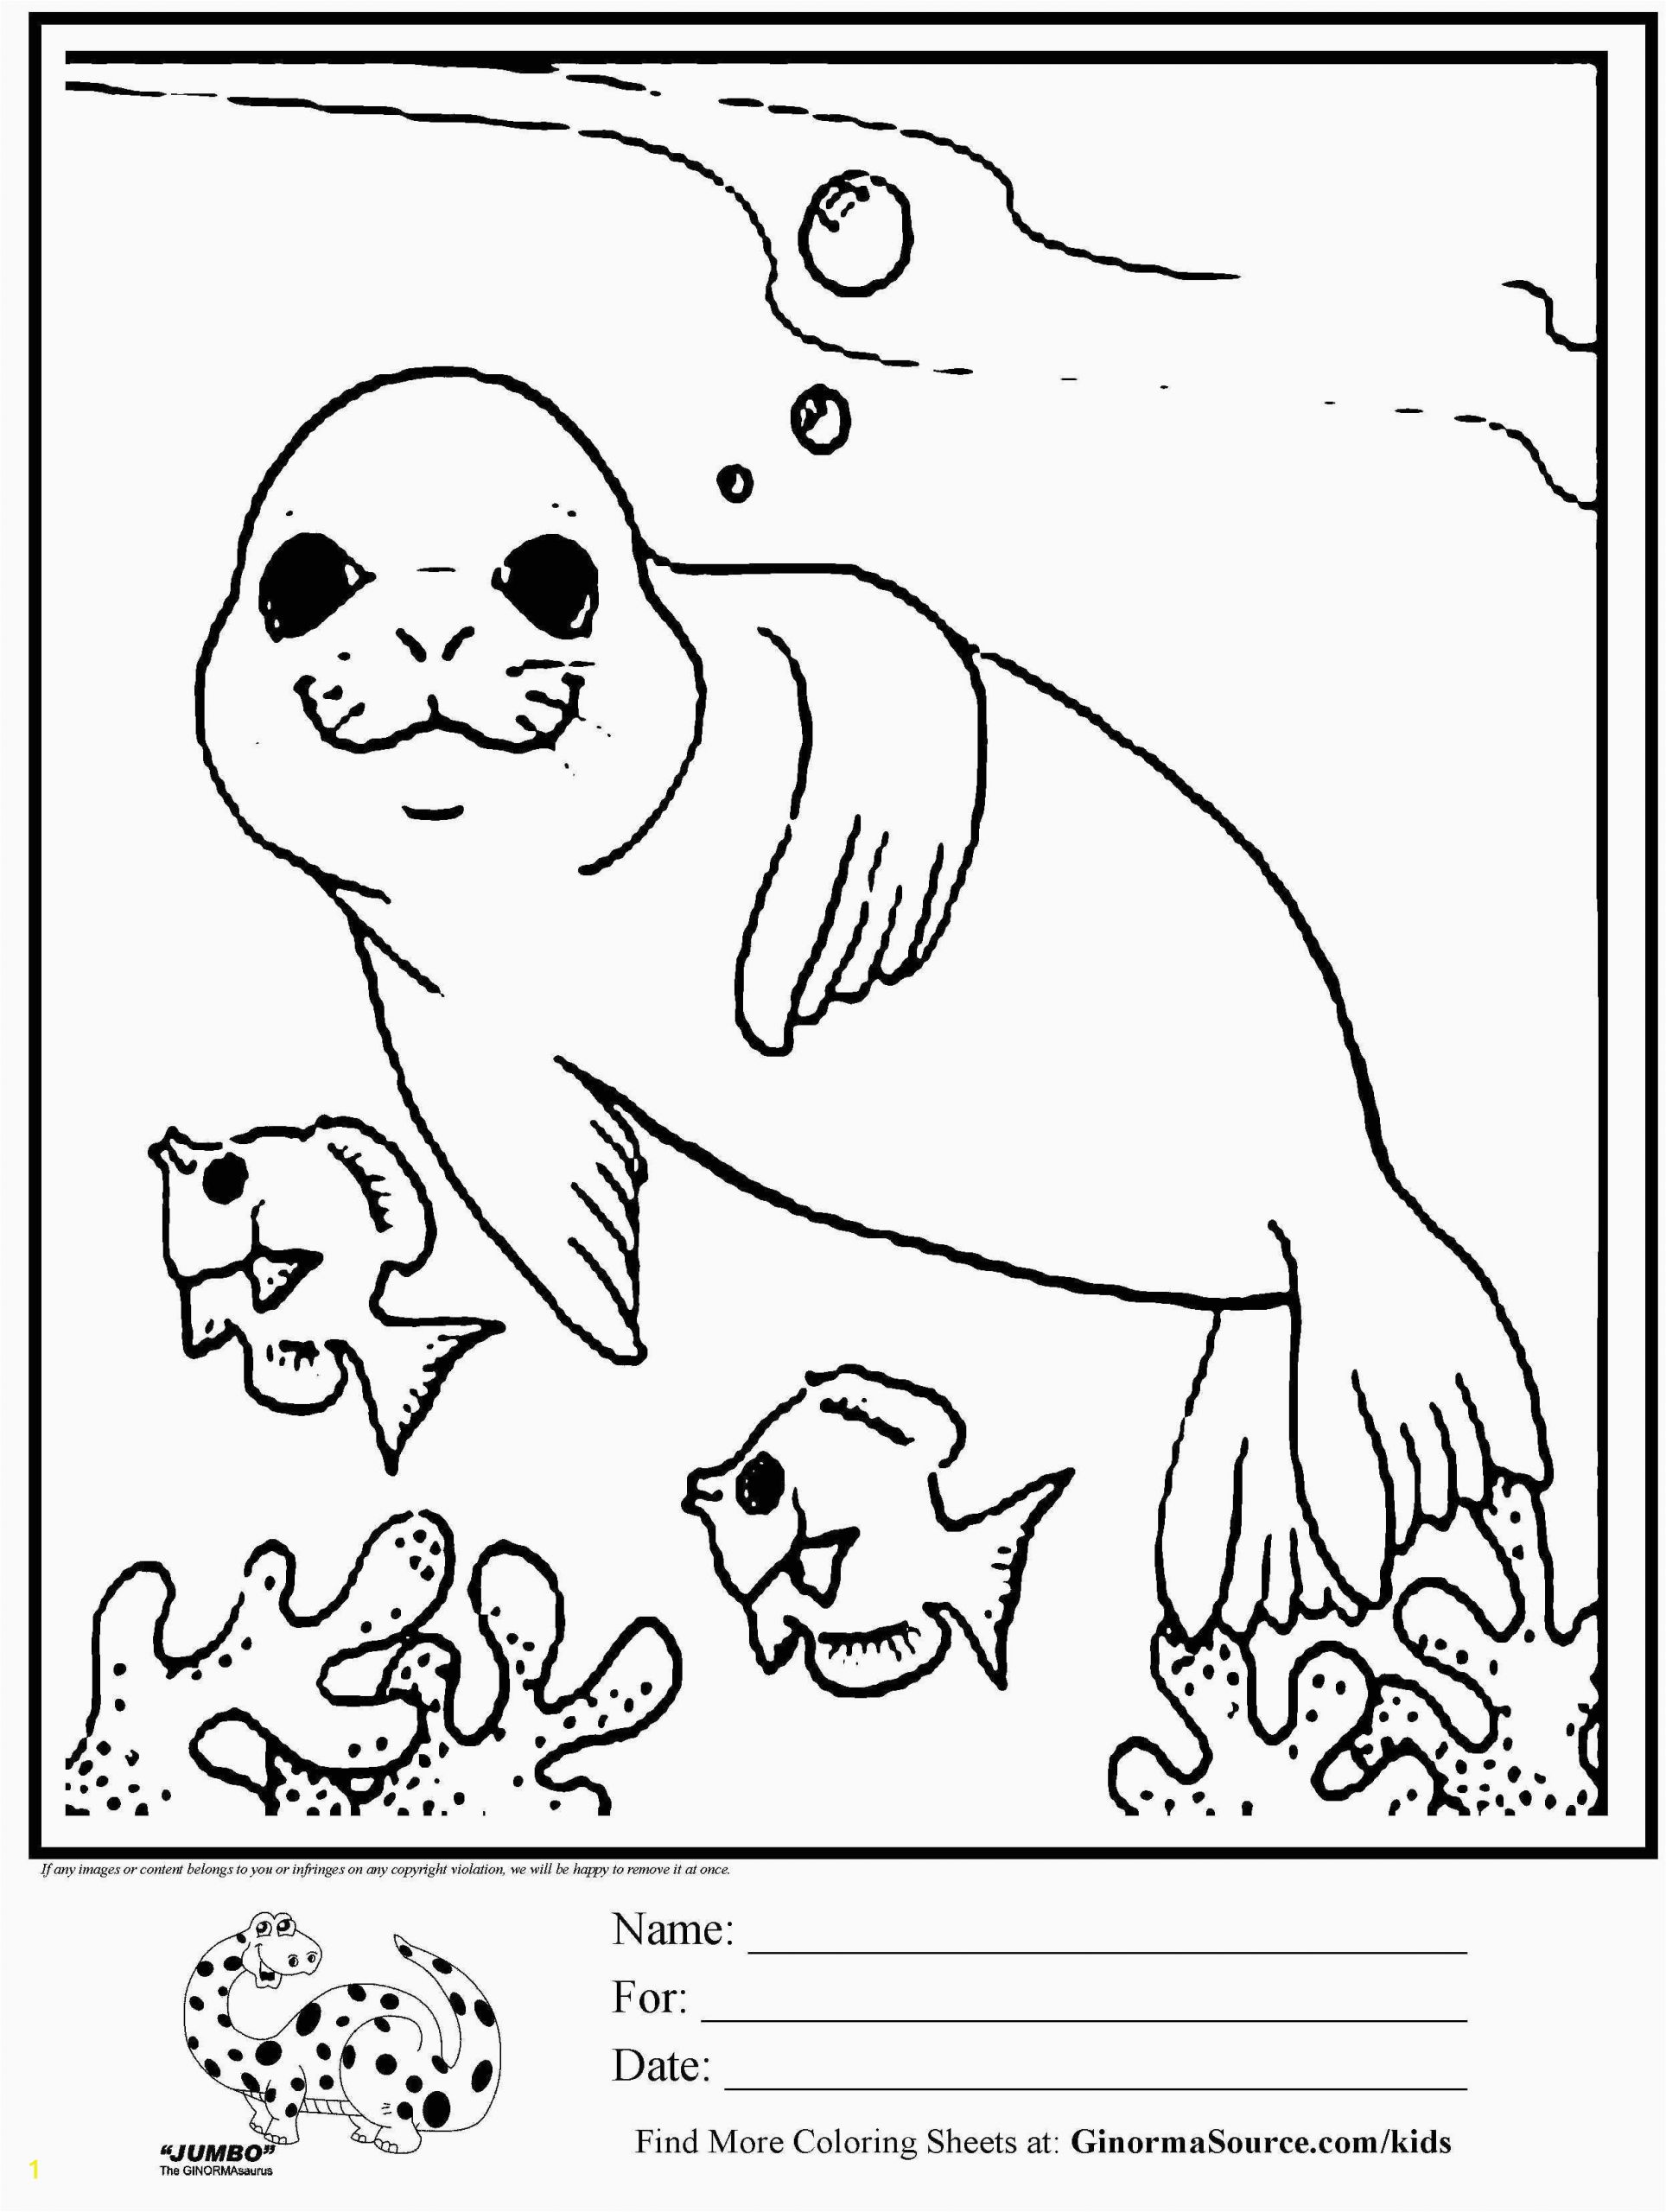 Coloring Pages for Kids Animals Step by Step Drawing Book Series Animals In 2020